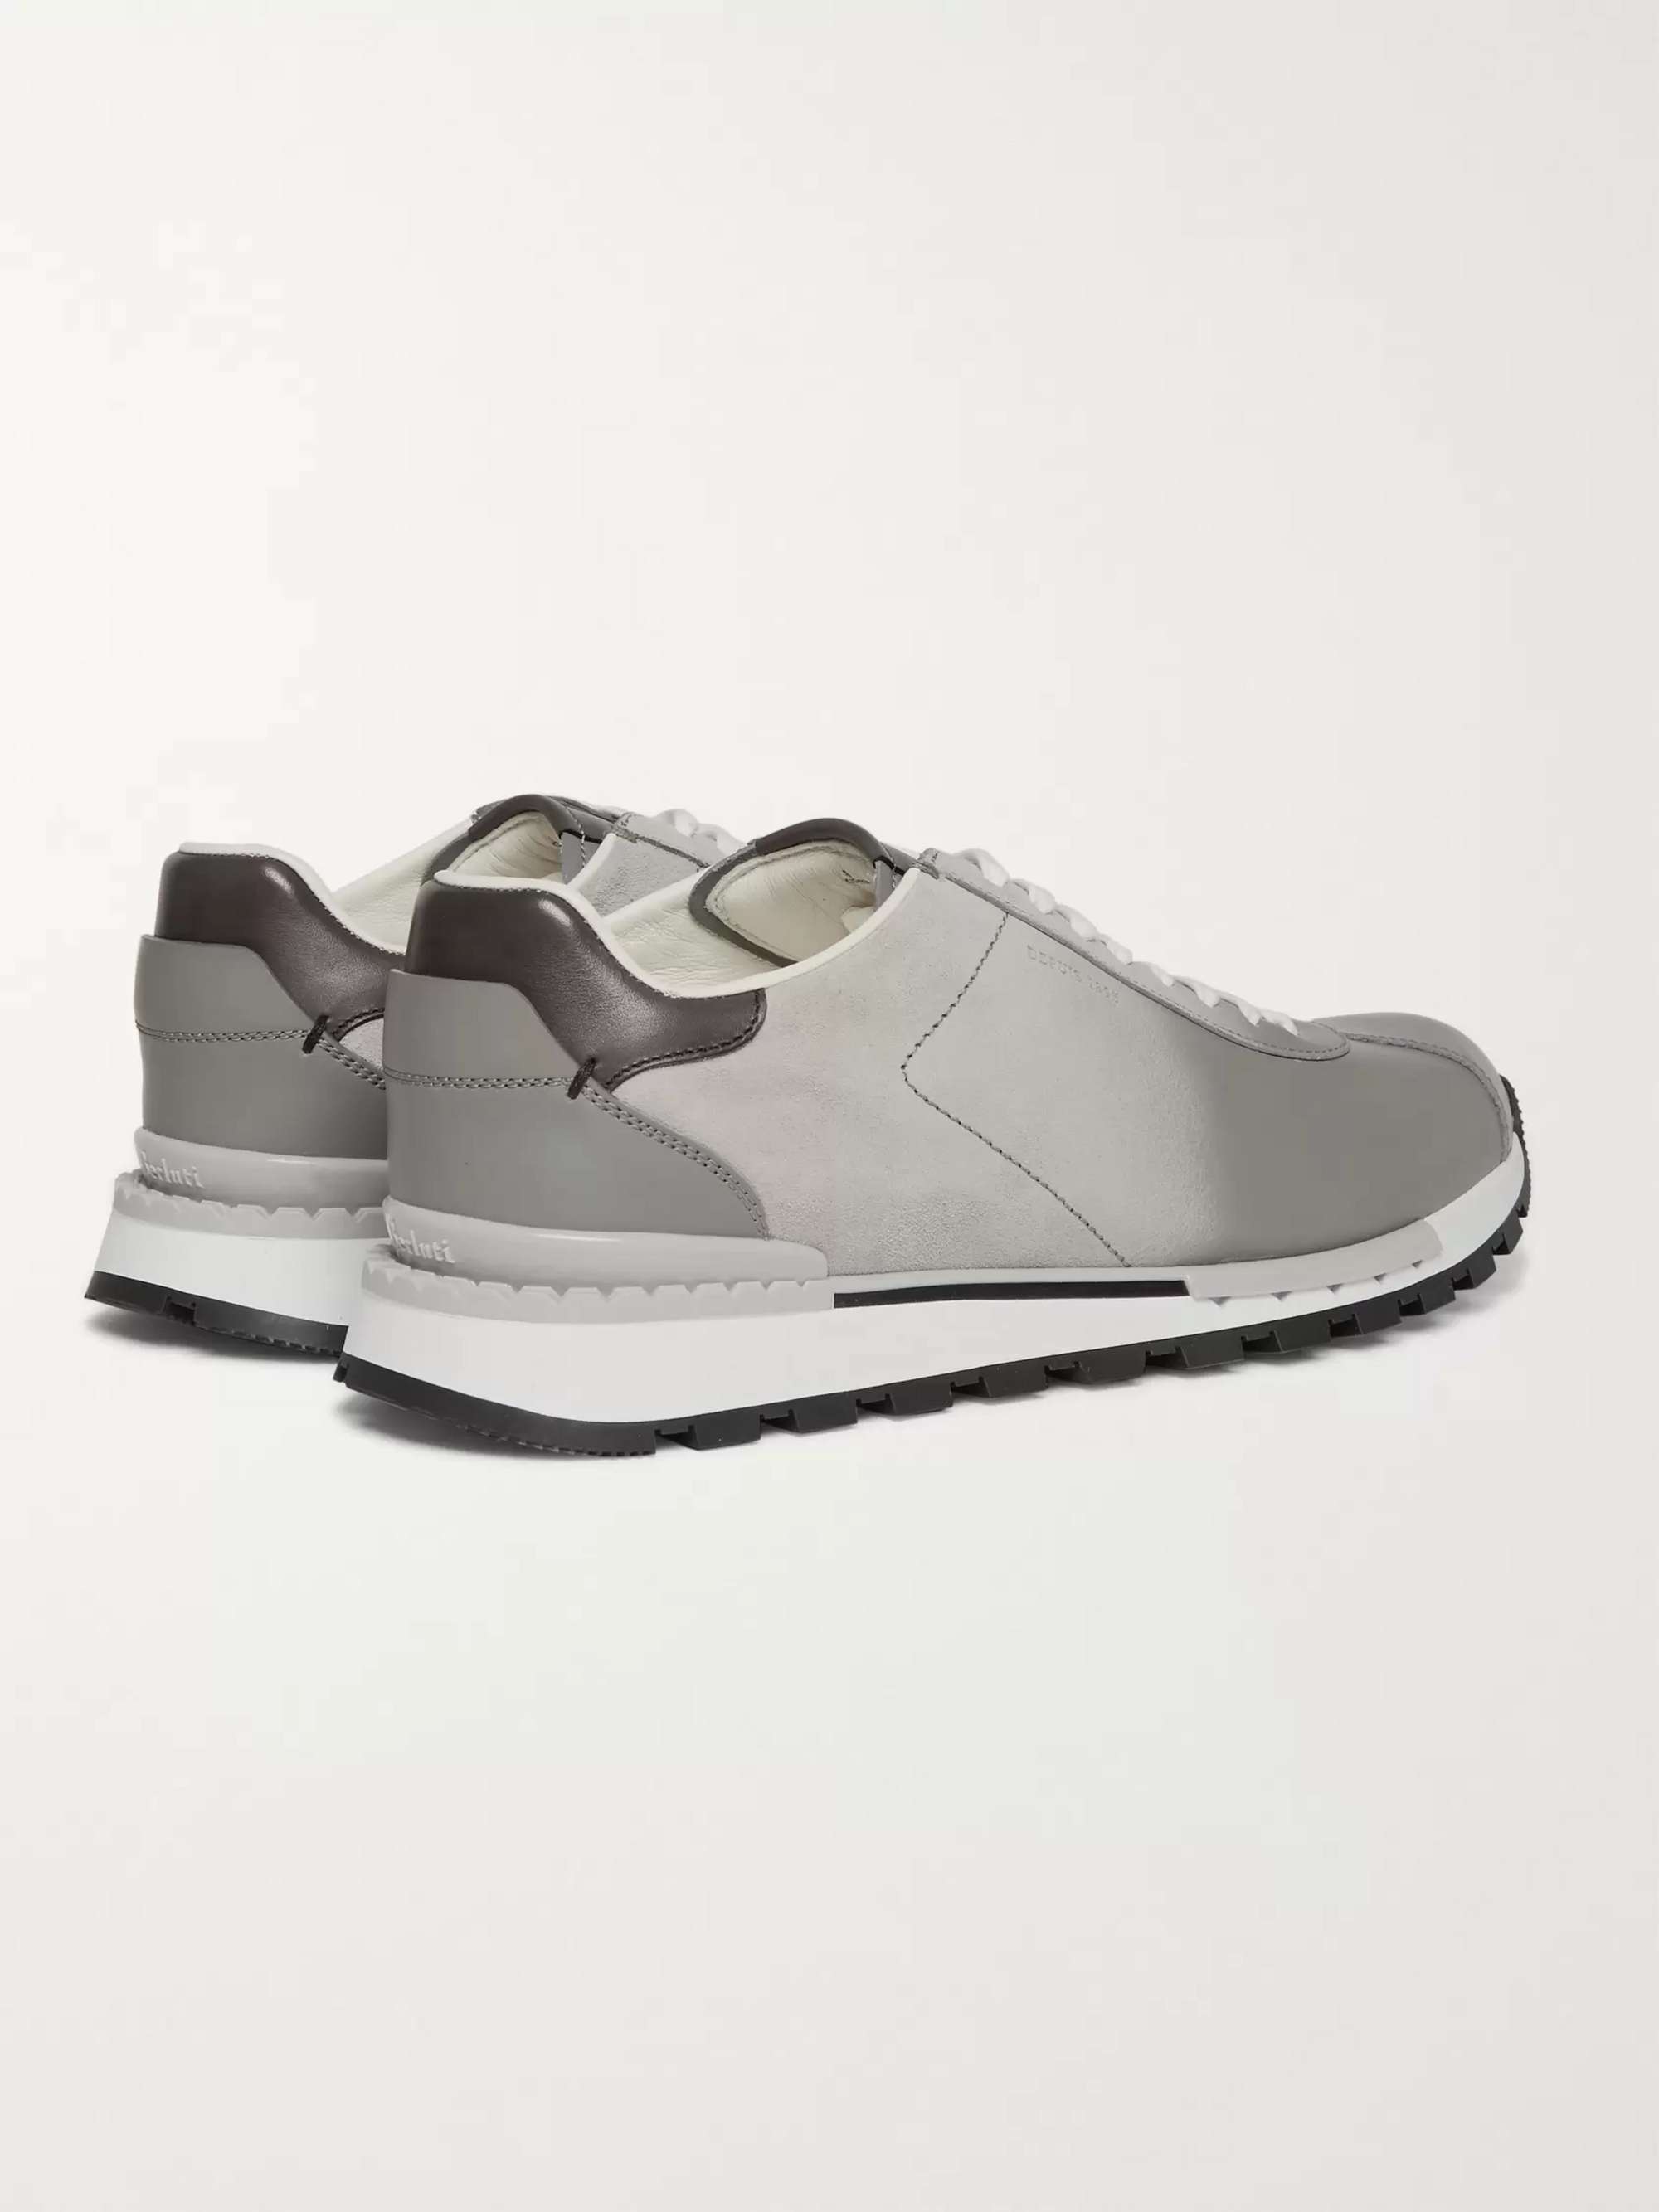 BERLUTI Fast Track Torino Suede and Leather Sneakers